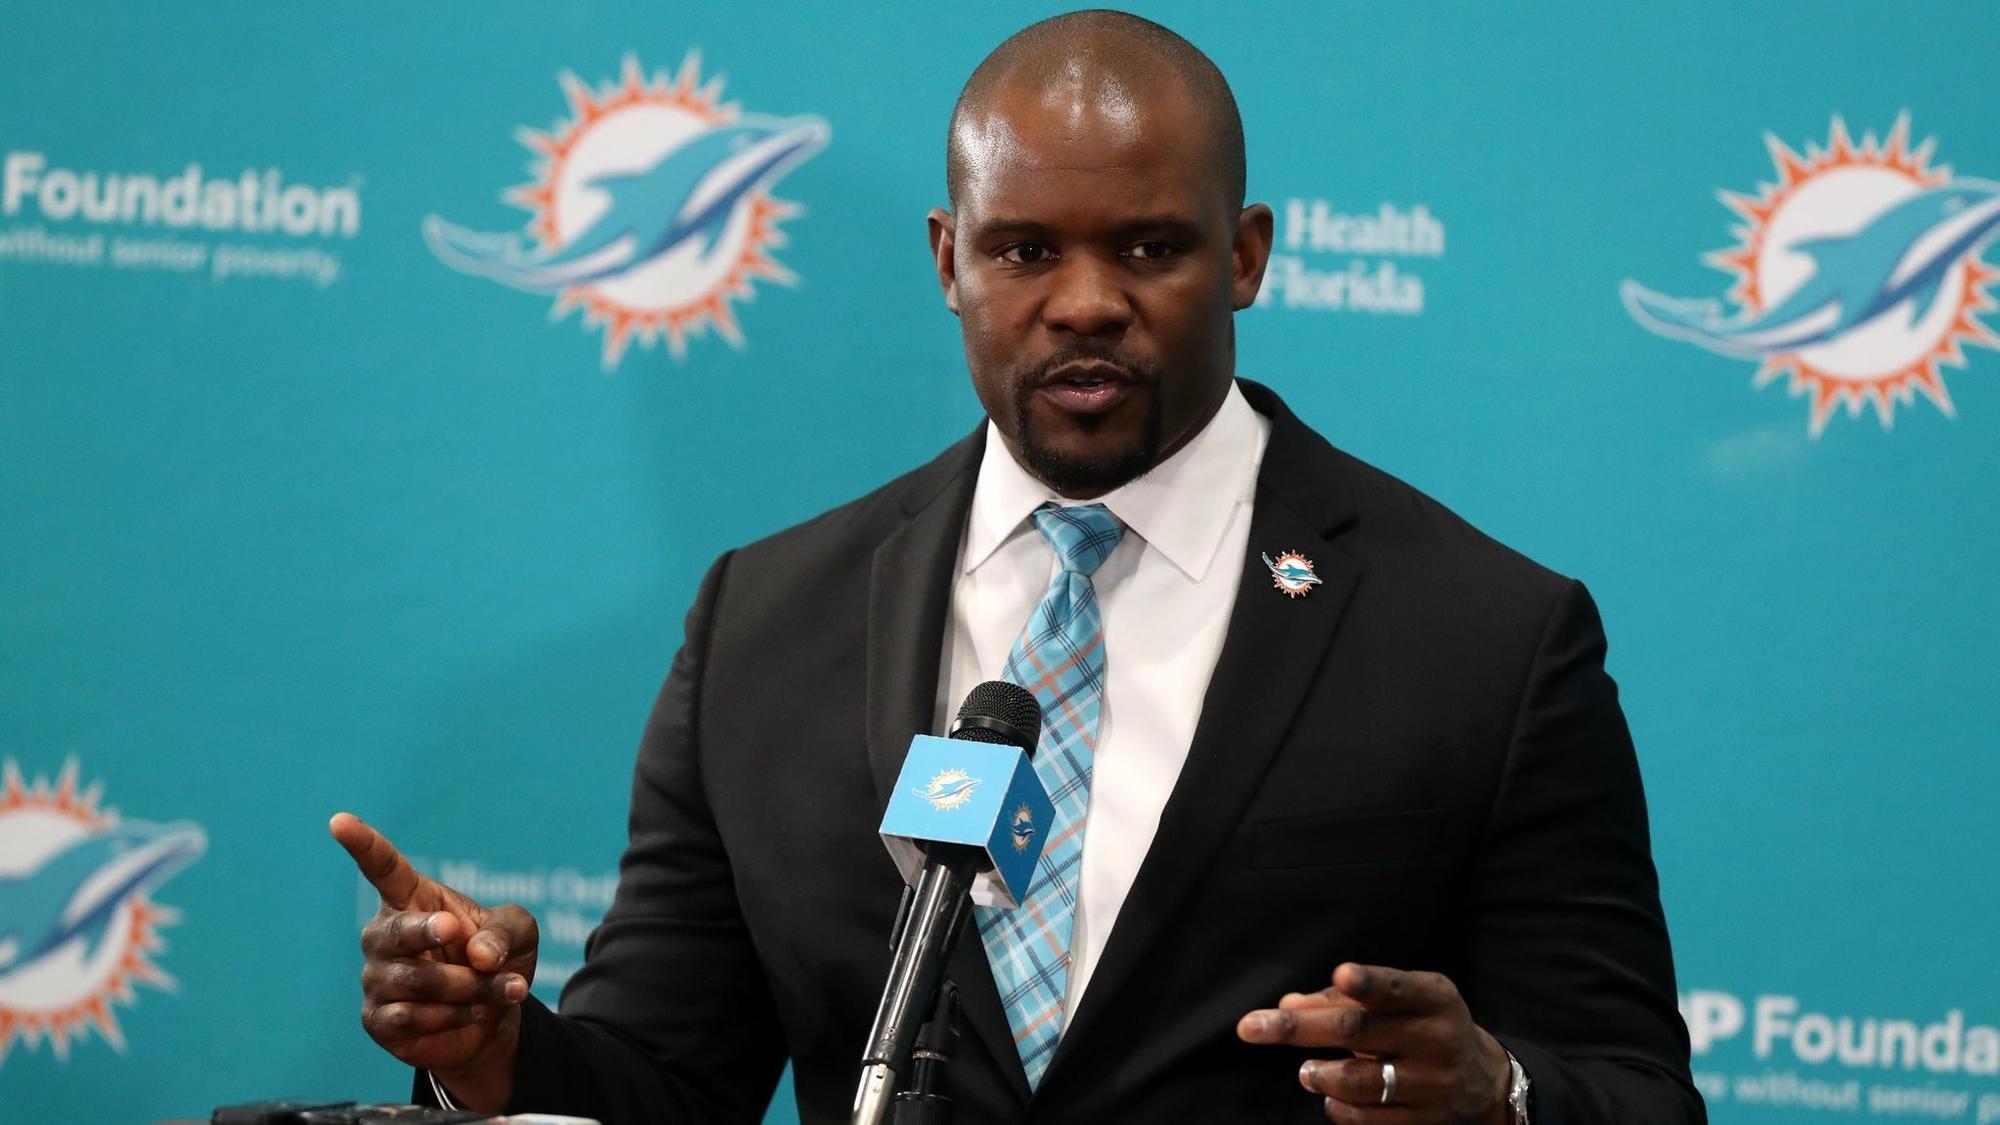 Brian Flores' whirlwind 24 hours ends with him being officially hired